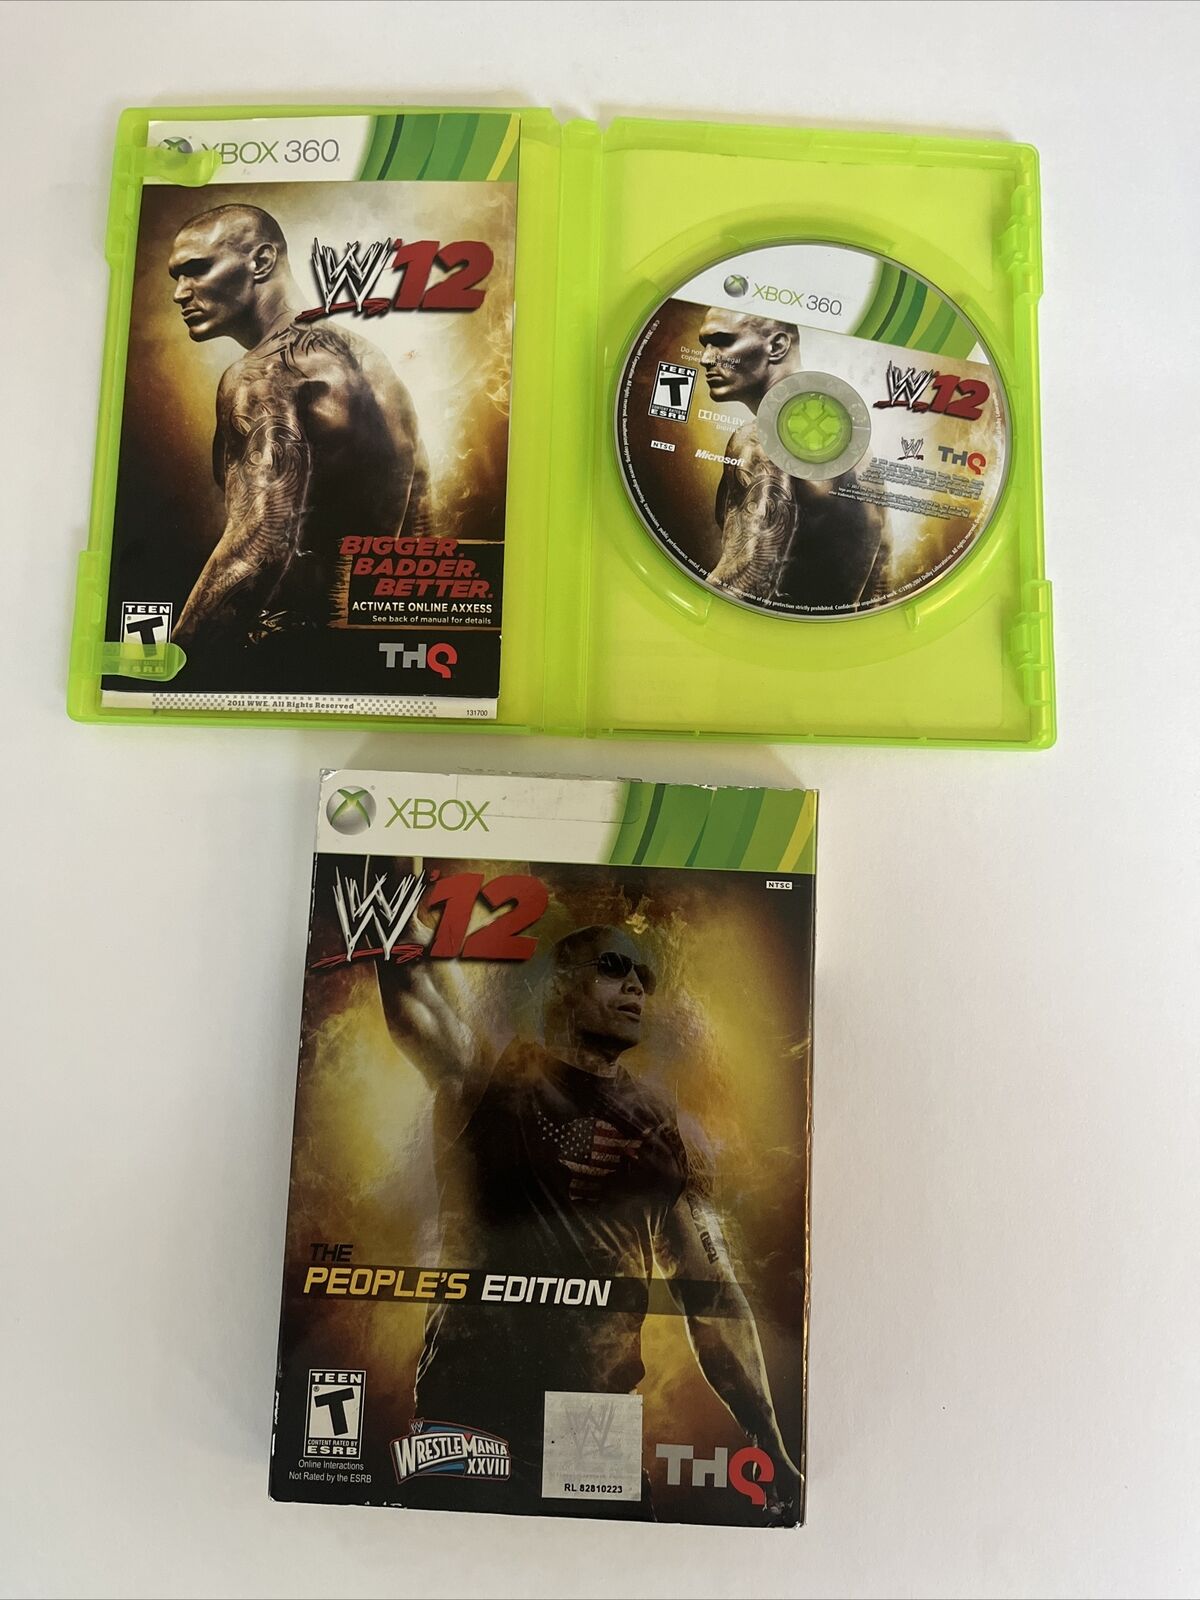 WWE '12 - The People's Edition (Xbox 360) RARE. Tested. Ships Fast